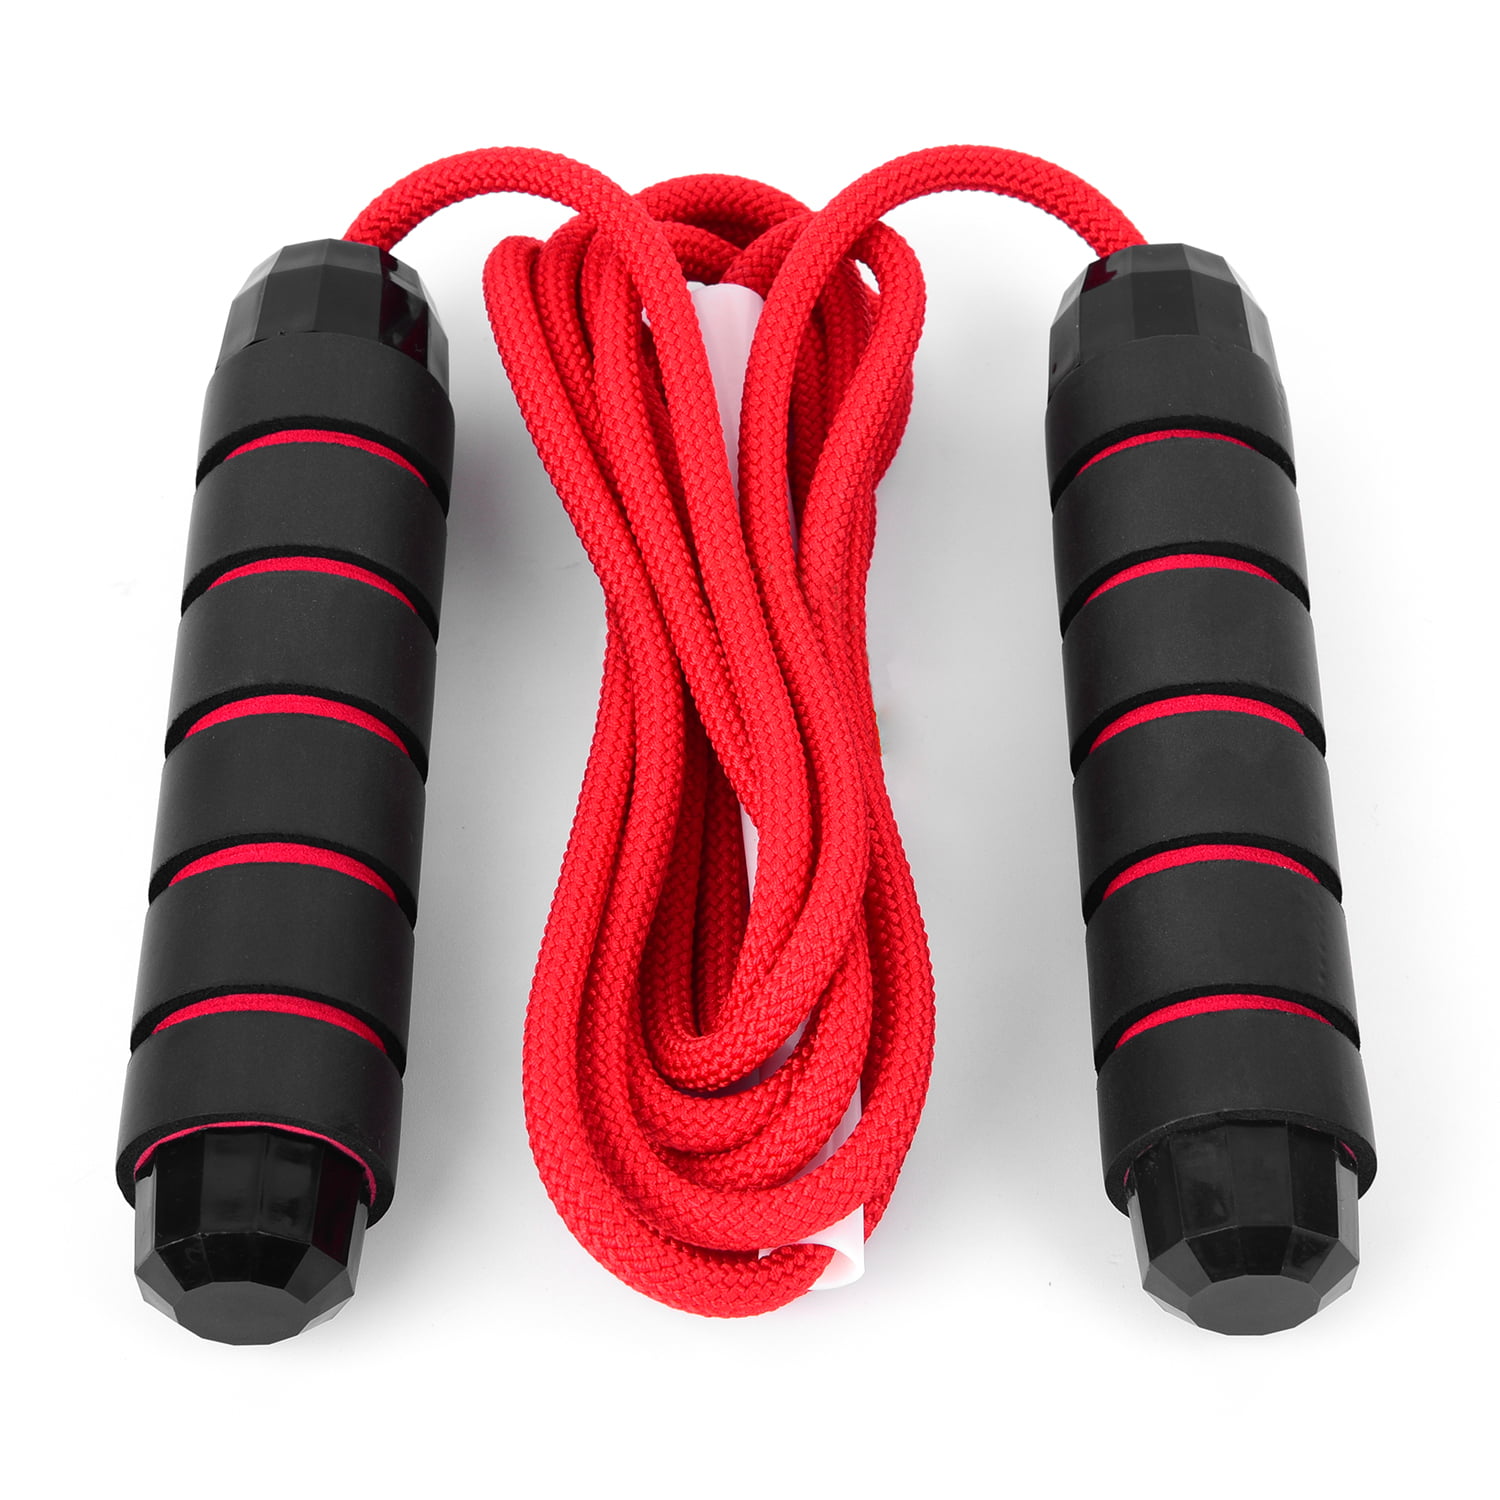 Strength Training Heavy Jump Rope Skipping Rope Workout Battle Rope 9.8 FT 